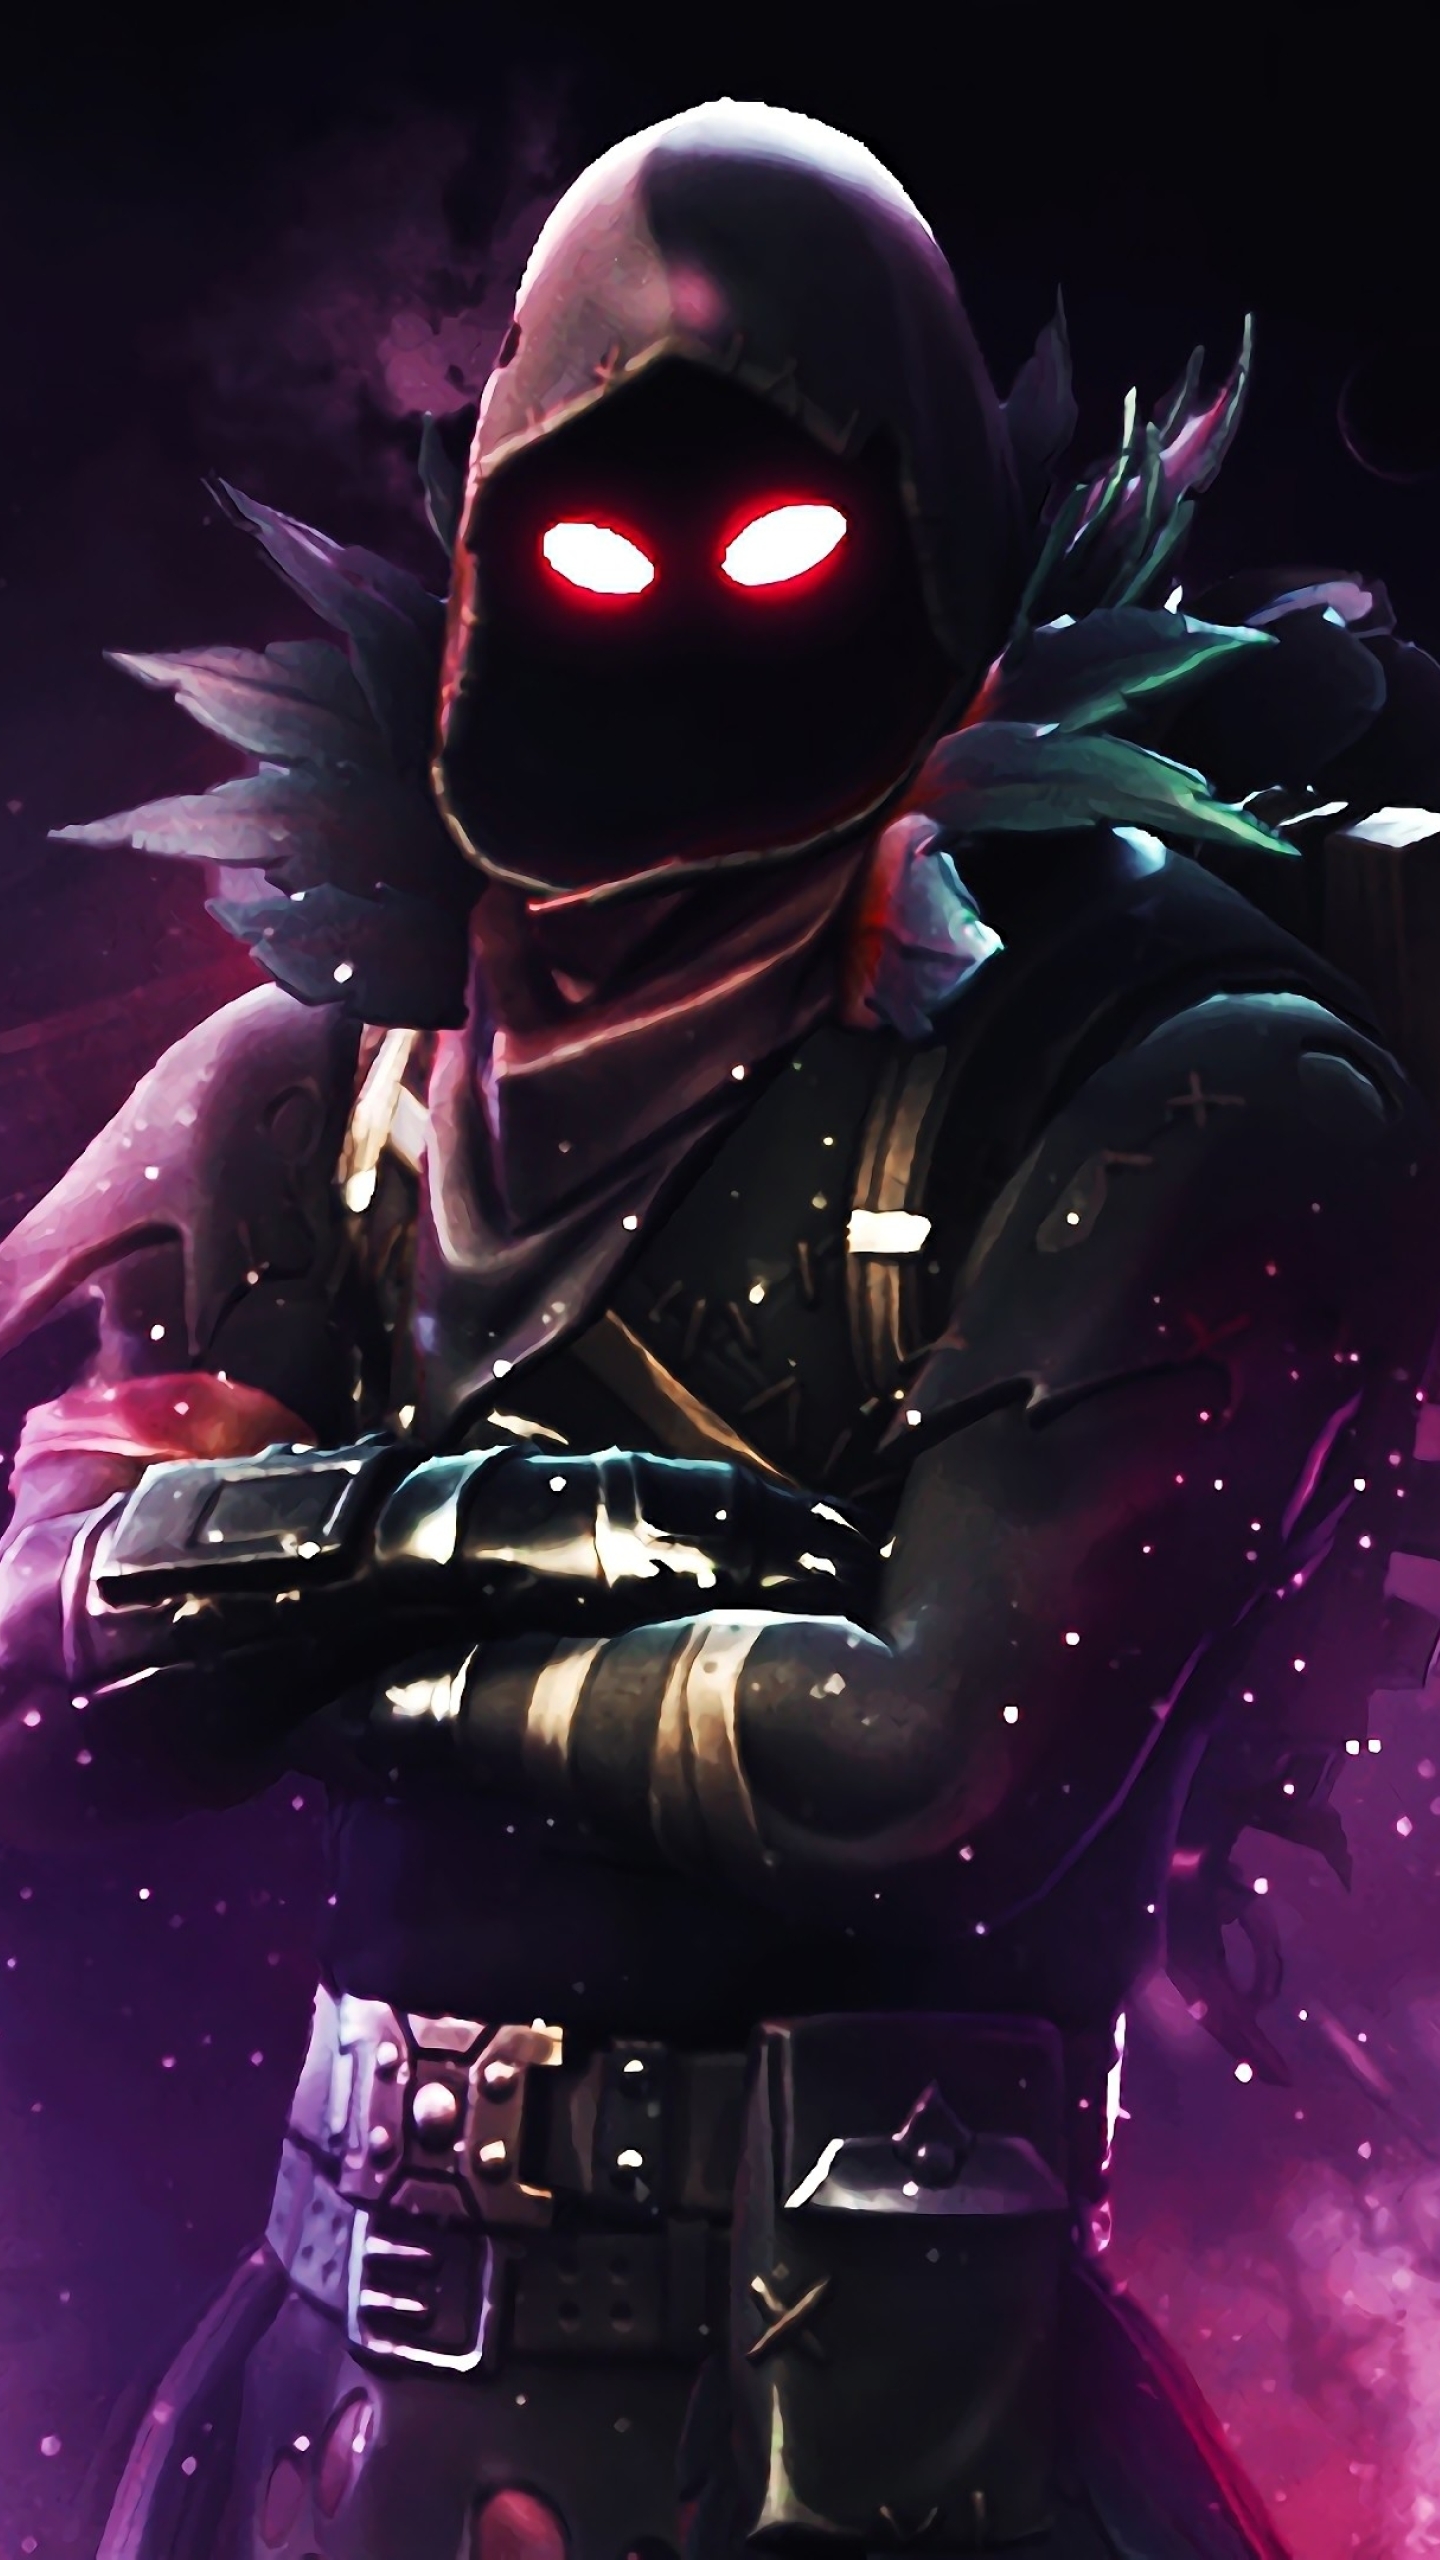 1440x2560 Raven Fortnite Battle Royale 4k Samsung Galaxy S6 S7 Google Pixel Xl Nexus 6 6p Lg G5 Background Hd Games 4k Wallpapers Images Photos And Background